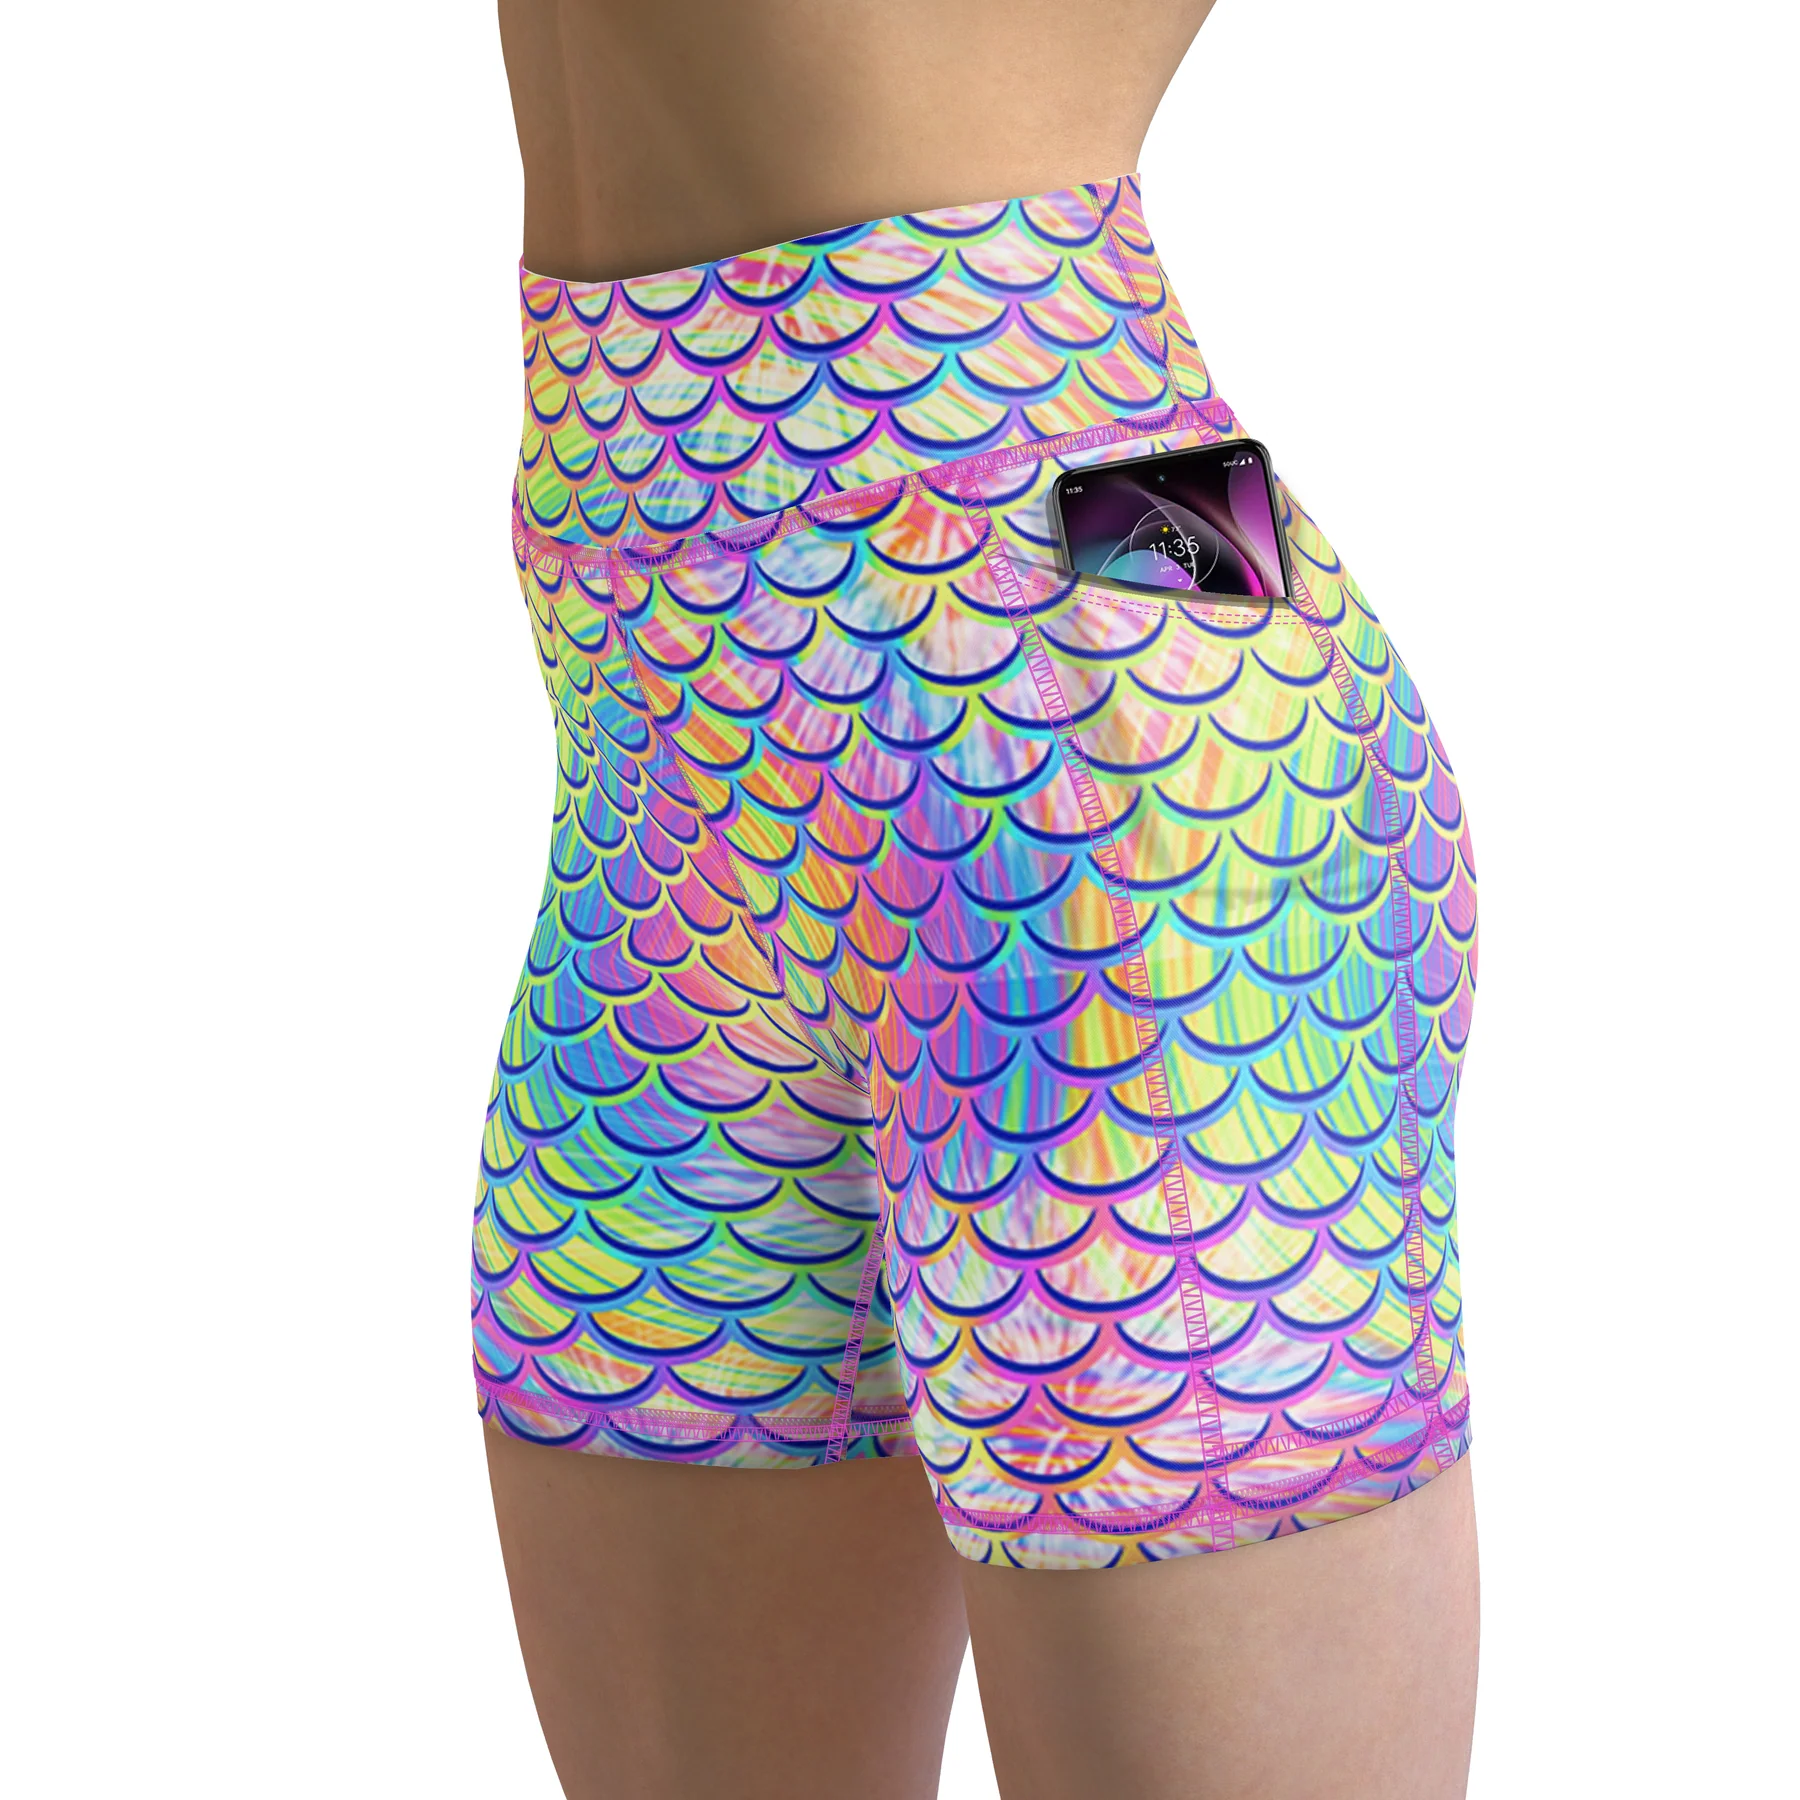 Spacefish Army Spacefish Army Psychedelic Mermaid Shorts